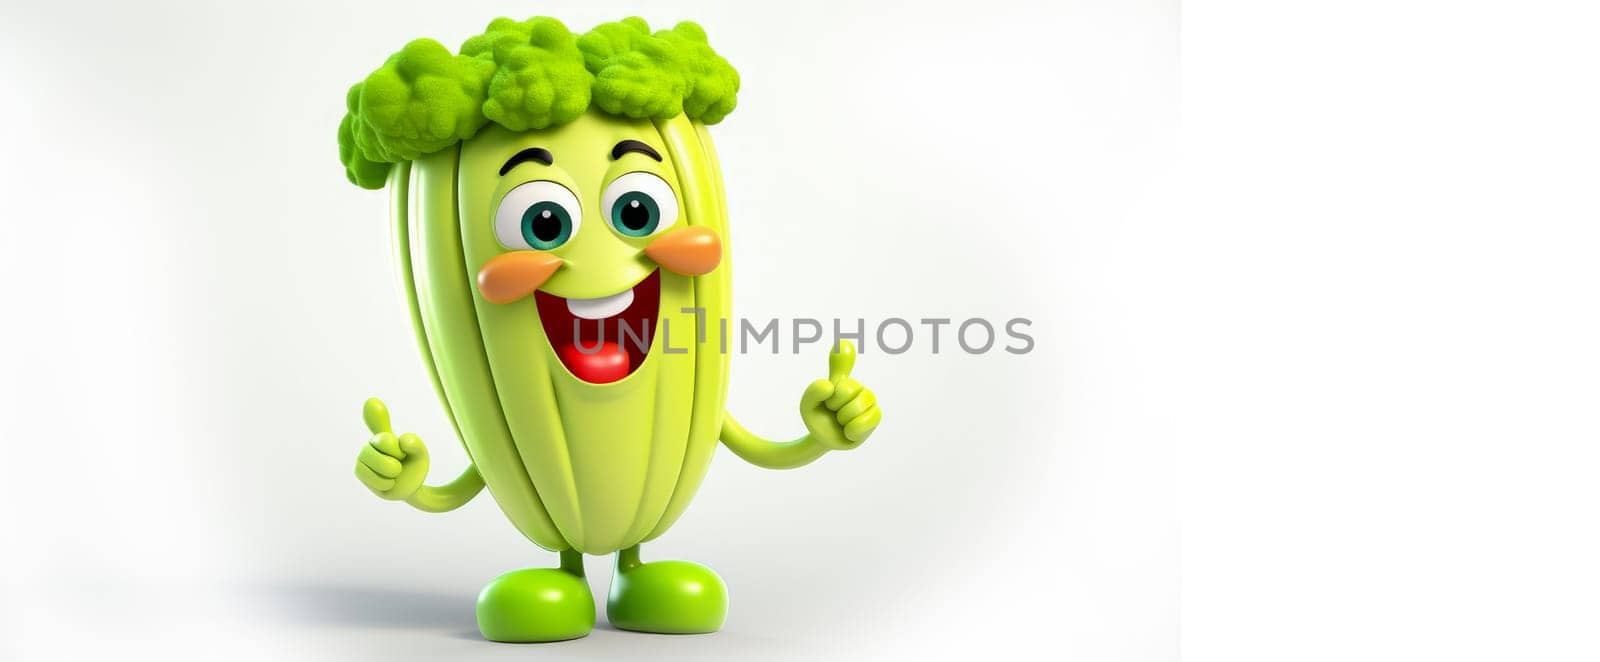 Celery with a cheerful face 3D on a white background. Cartoon characters, three-dimensional character, healthy lifestyle, proper nutrition, diet, fresh vegetables and fruits, vegetarianism, veganism, food, breakfast, fun, laughter, banner